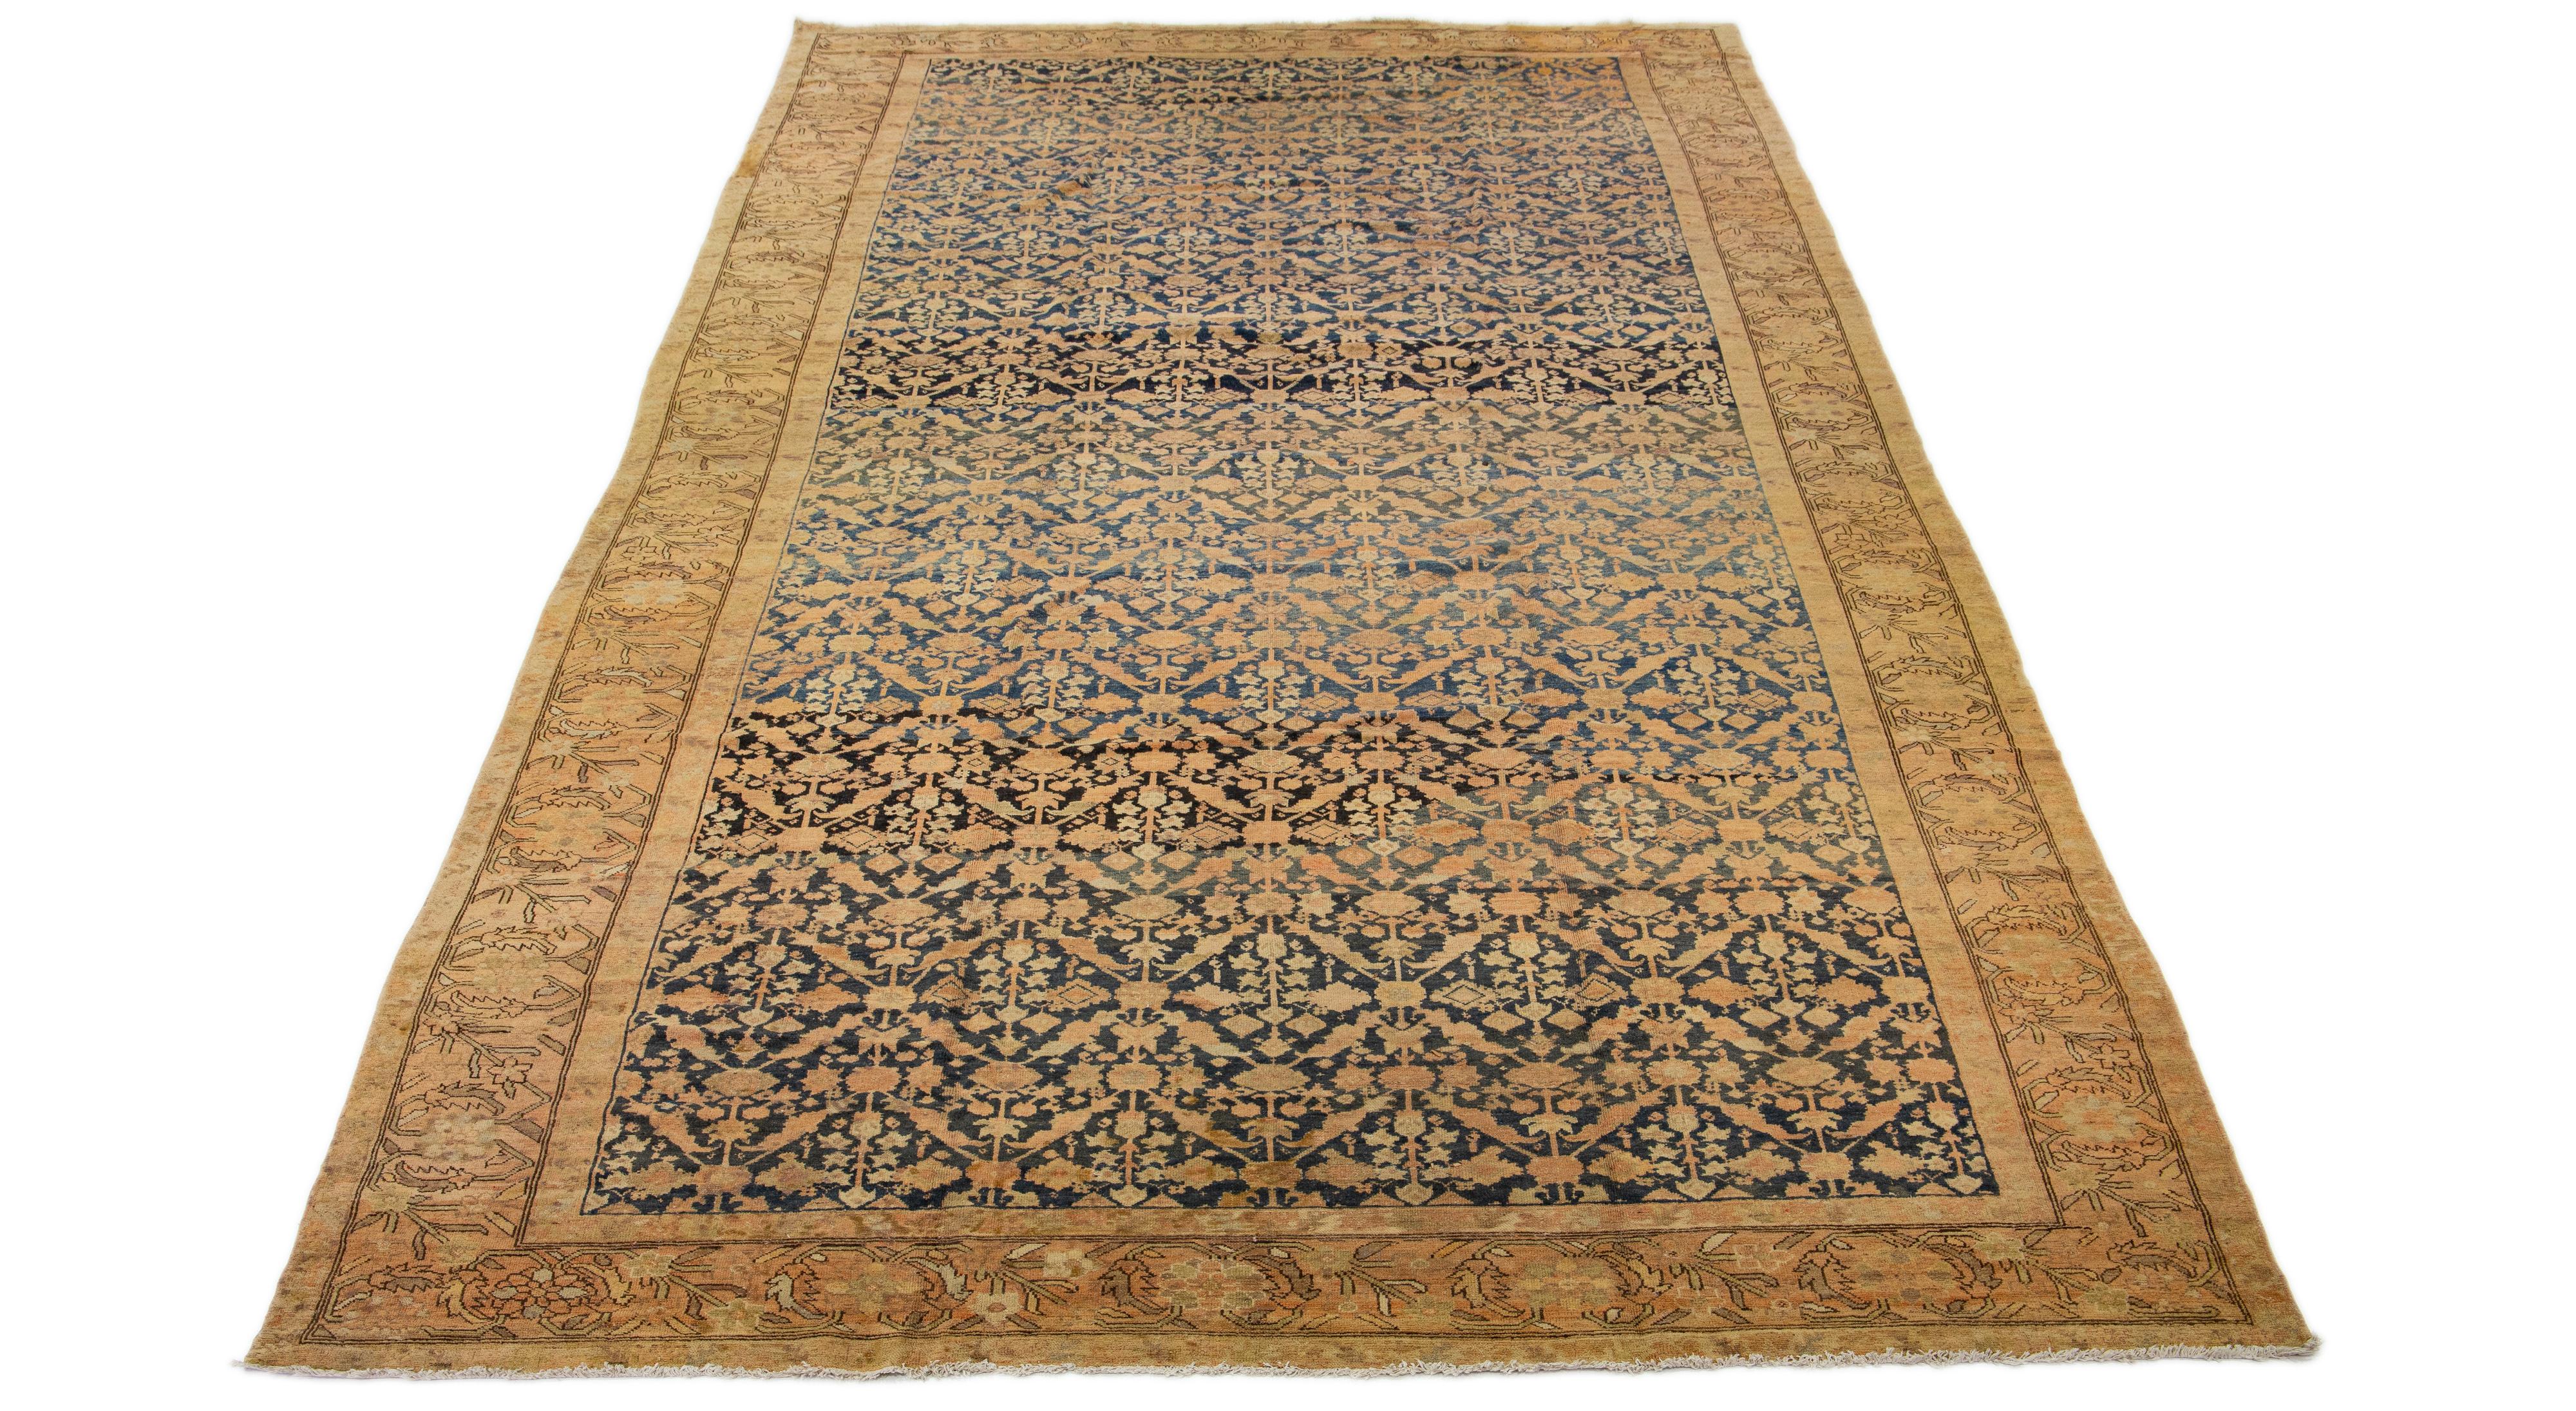 This exceptional, antique Persian Malayer rug is handcrafted from meticulously woven wool. The display features a calm navy blue at its base, embellished with tan highlights in an impressively intricate all-over classical pattern.

This rug measures